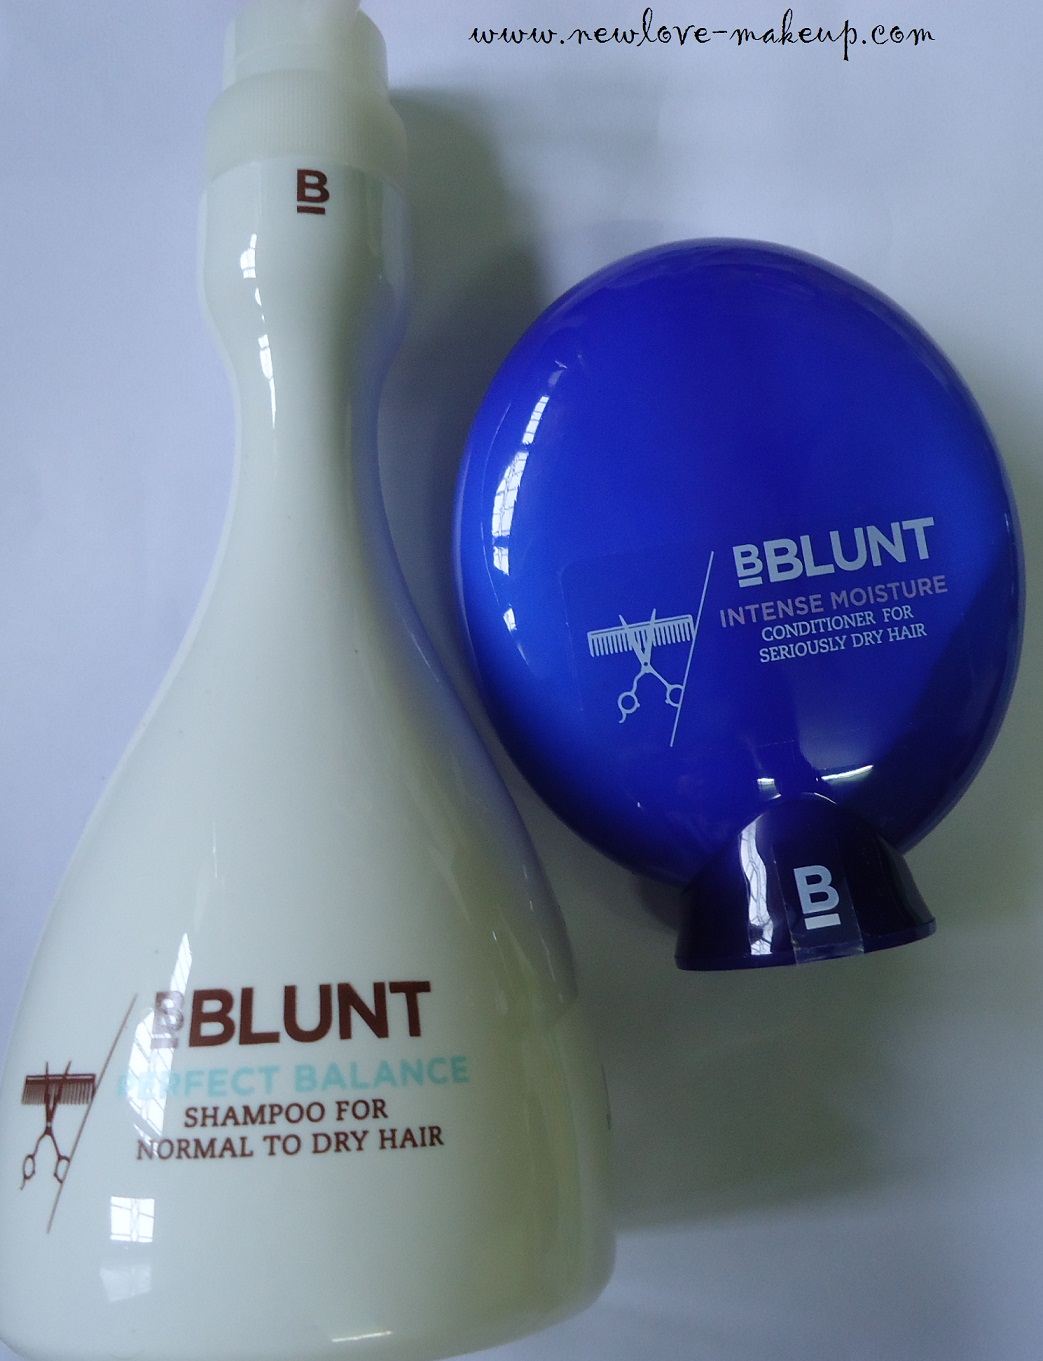 BBLUNT Perfect Balance Shampoo, Intense Moisture Conditioner Review - New  Love - Makeup